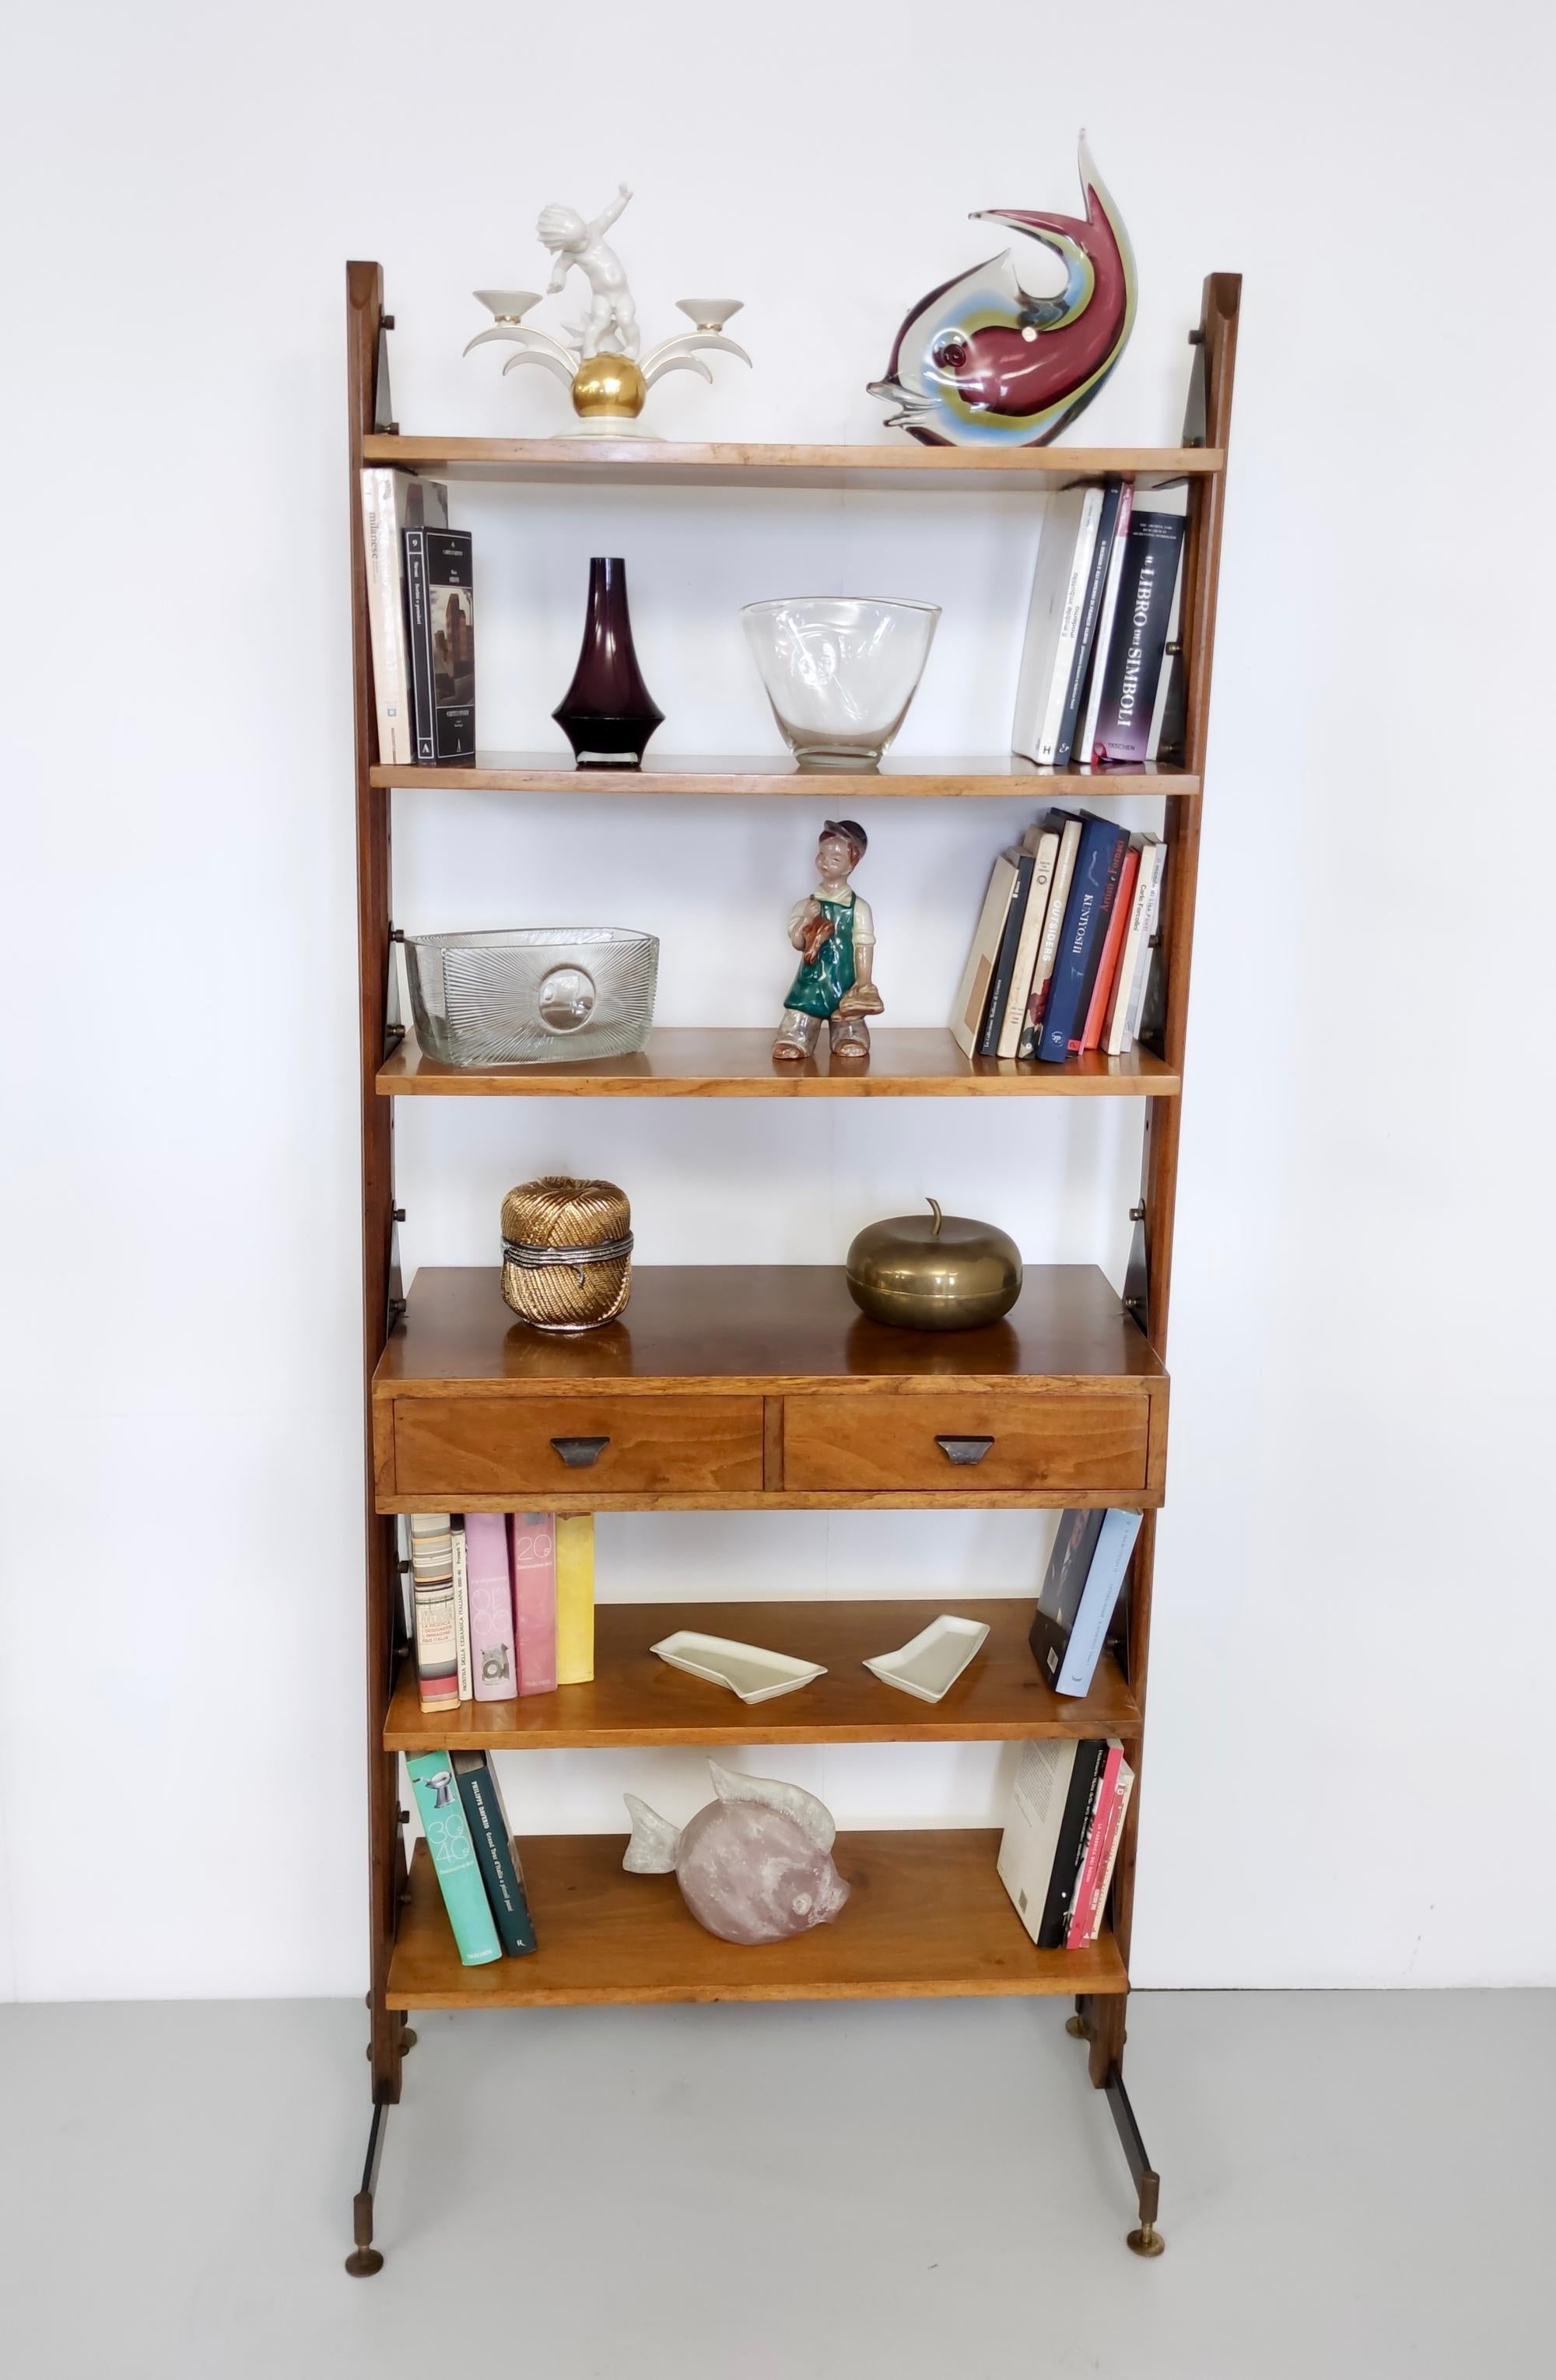 Made in Italy, 1970s.
This bookshelf is made in walnut and features a varnished metal frame with brass feet caps and details.
It may show slight traces of use since it's vintage, but it can be considered as in very good original condition and ready